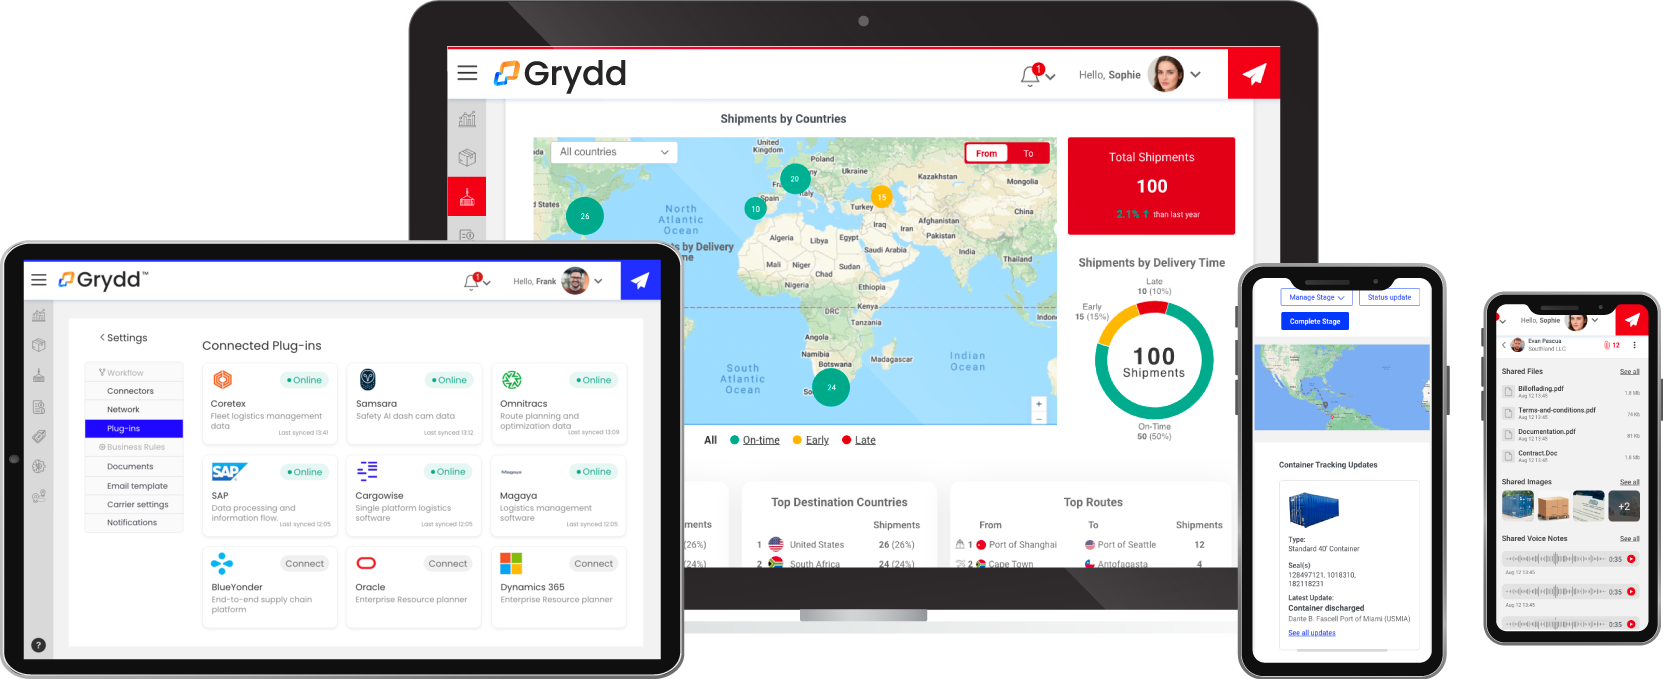 grydd operating system dashboards and computers